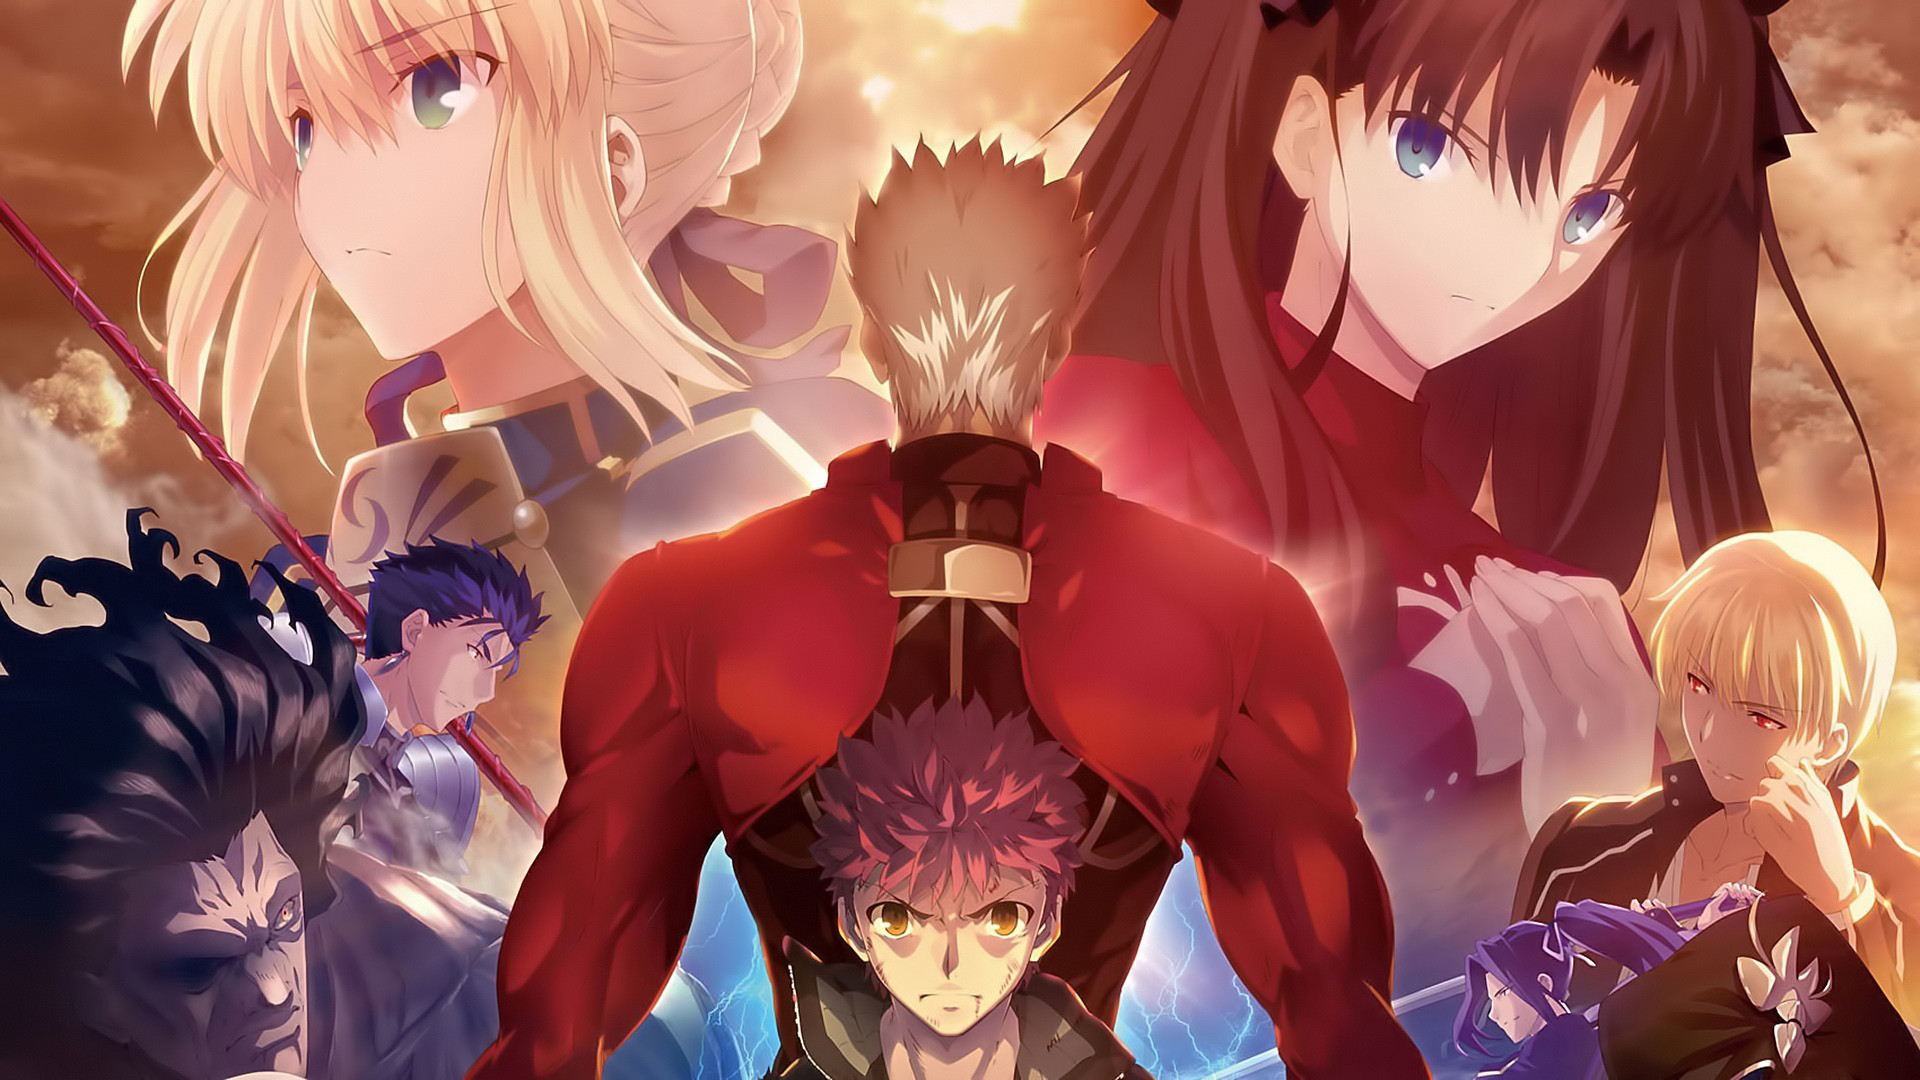 1920x1080 Anime - Fate/Stay Night: Unlimited Blade Works Wallpaper